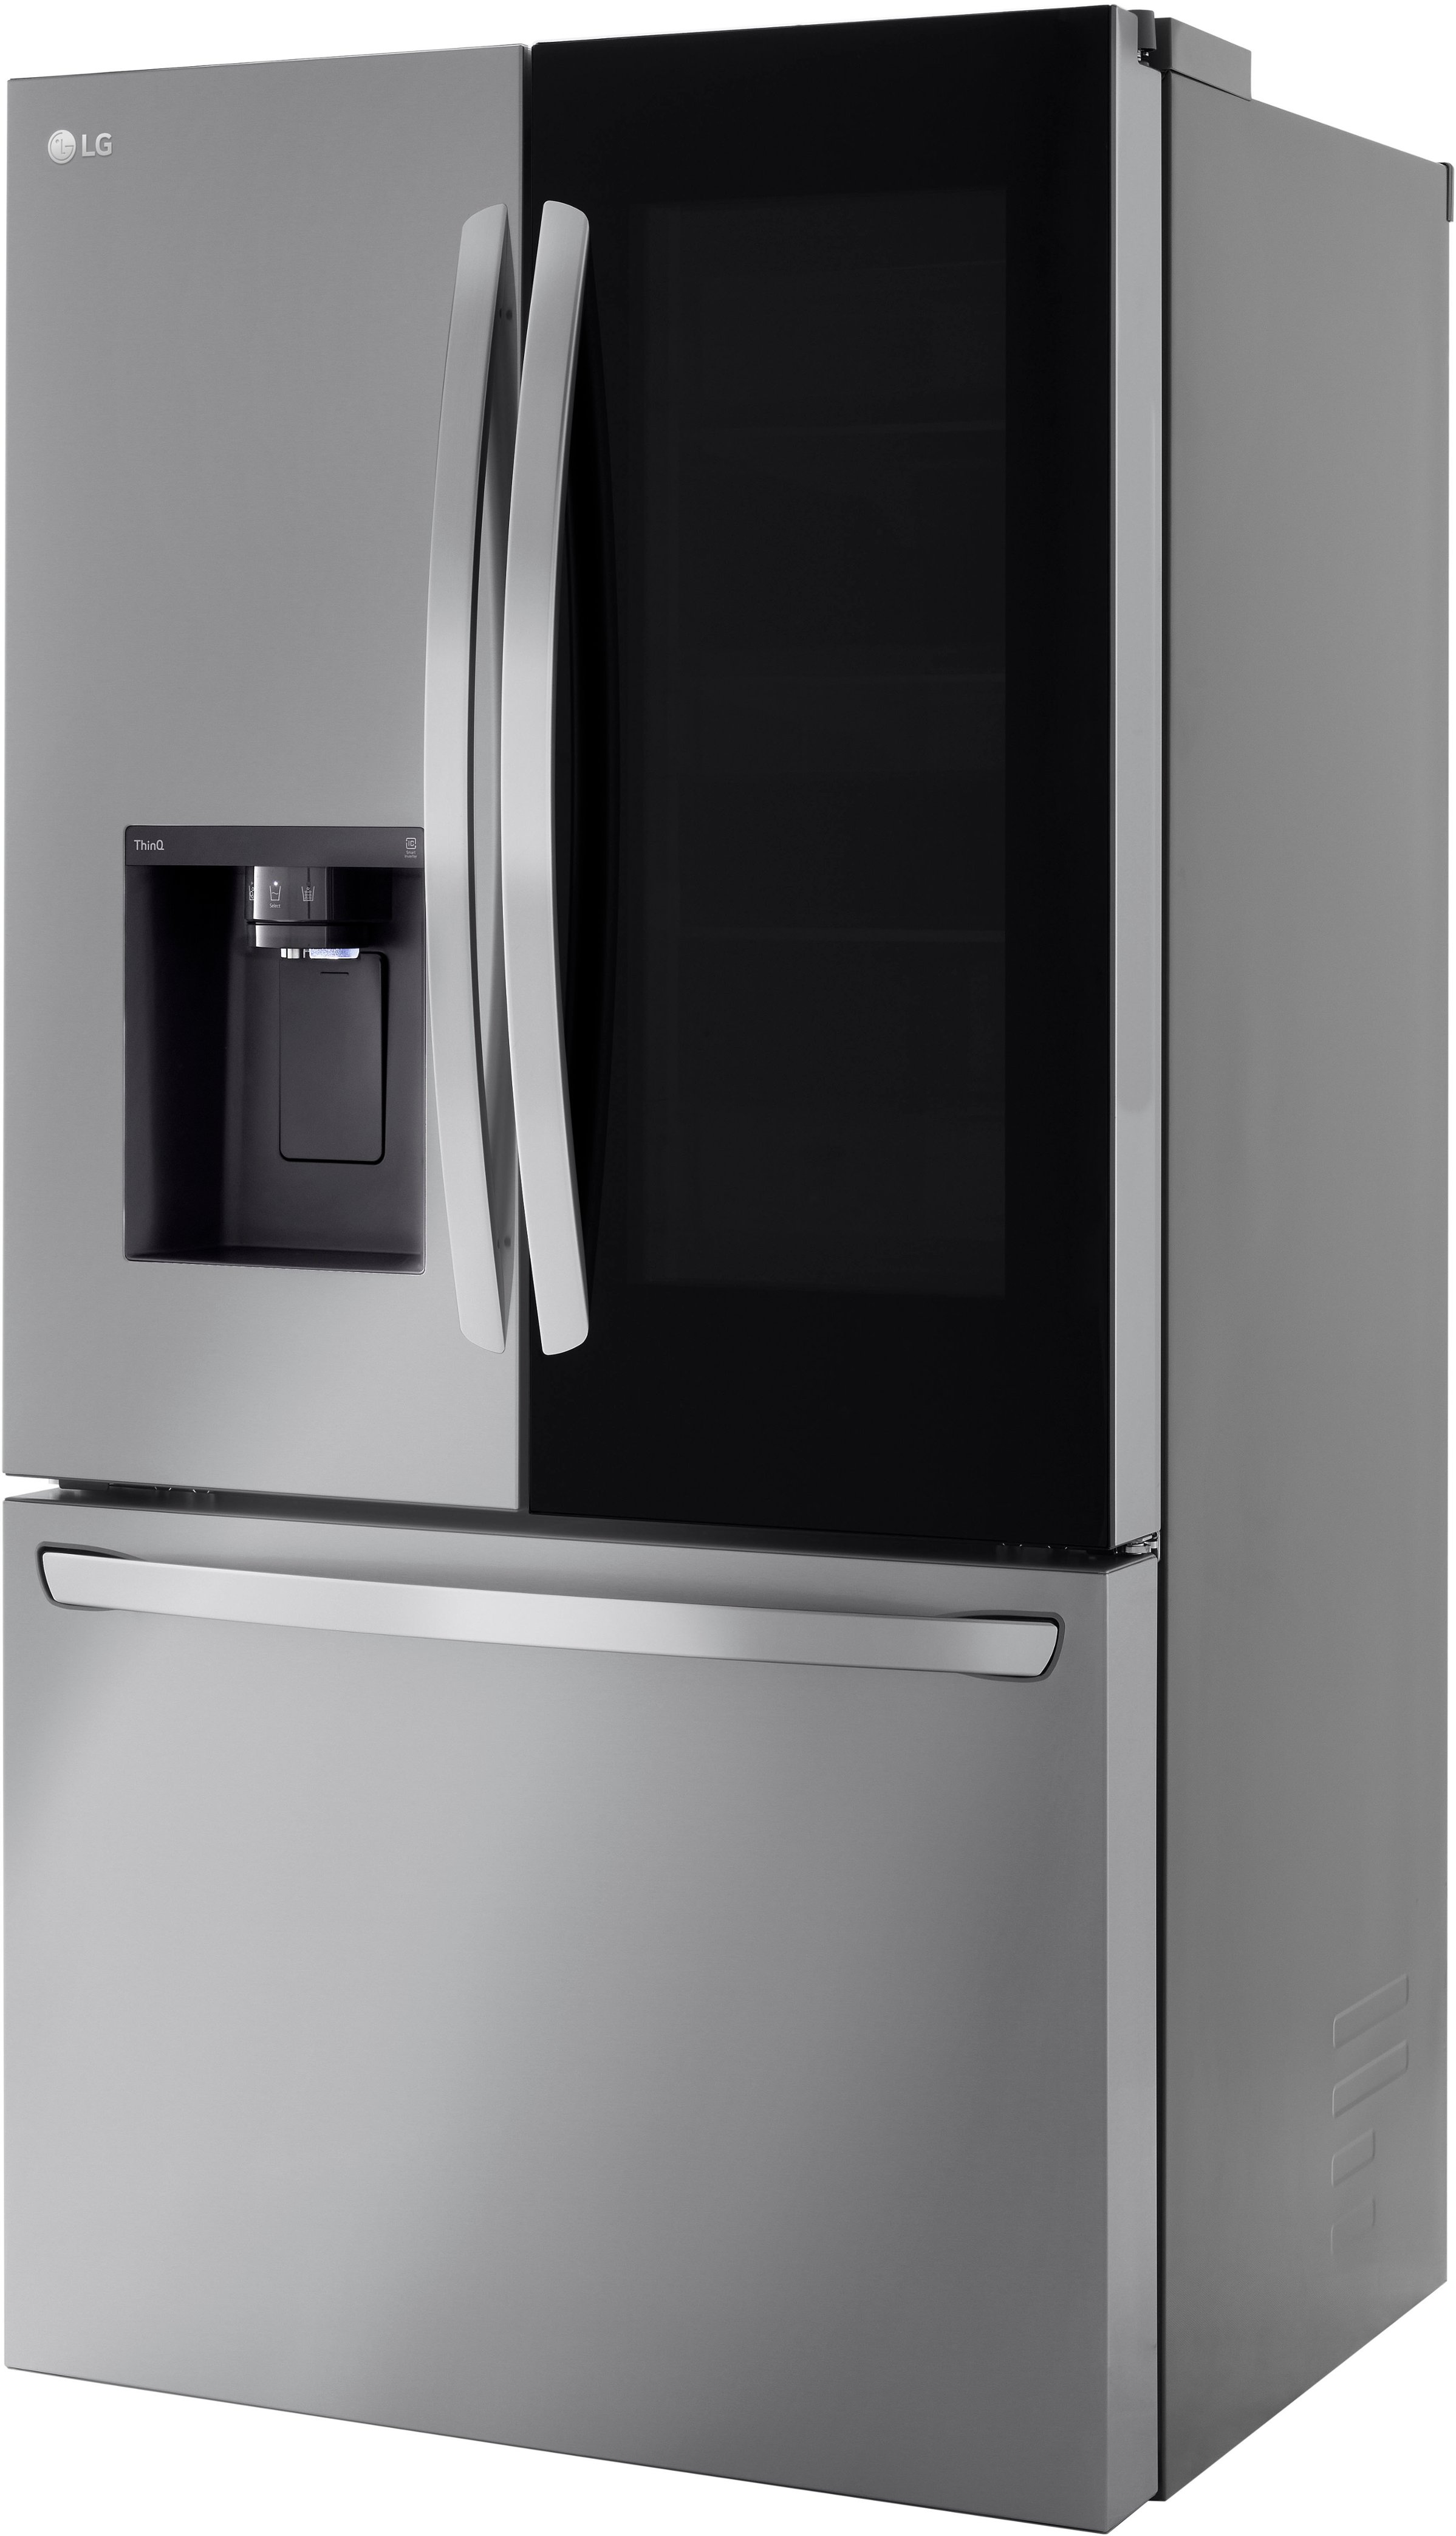 Customer Reviews Lg 25 5 Cu Ft French Door Counter Depth Smart Refrigerator With Instaview